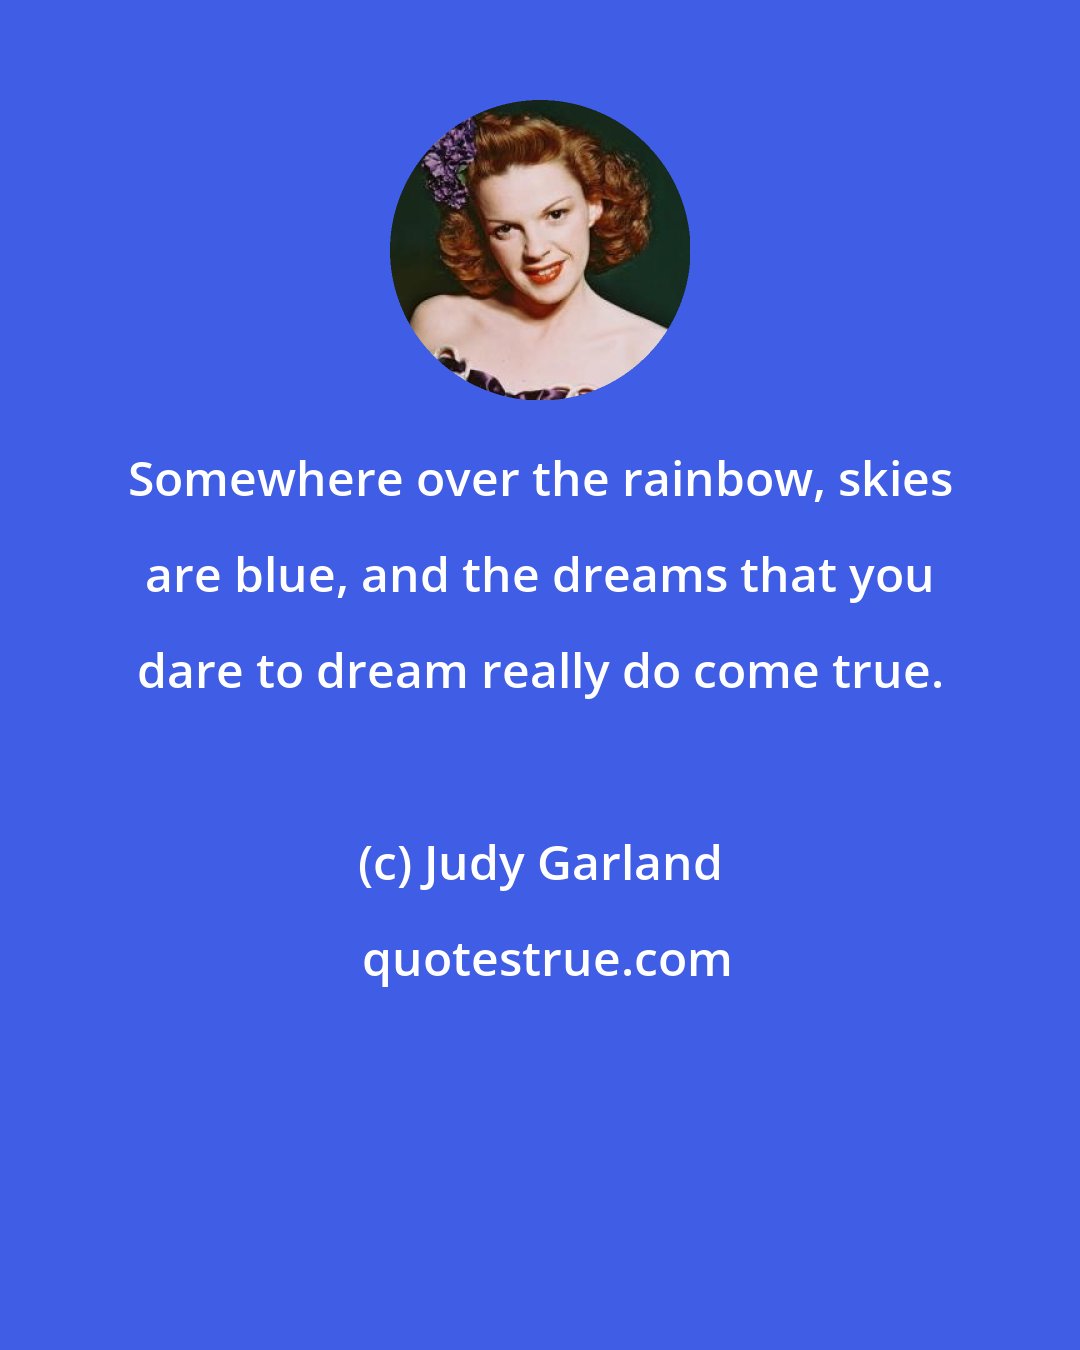 Judy Garland: Somewhere over the rainbow, skies are blue, and the dreams that you dare to dream really do come true.